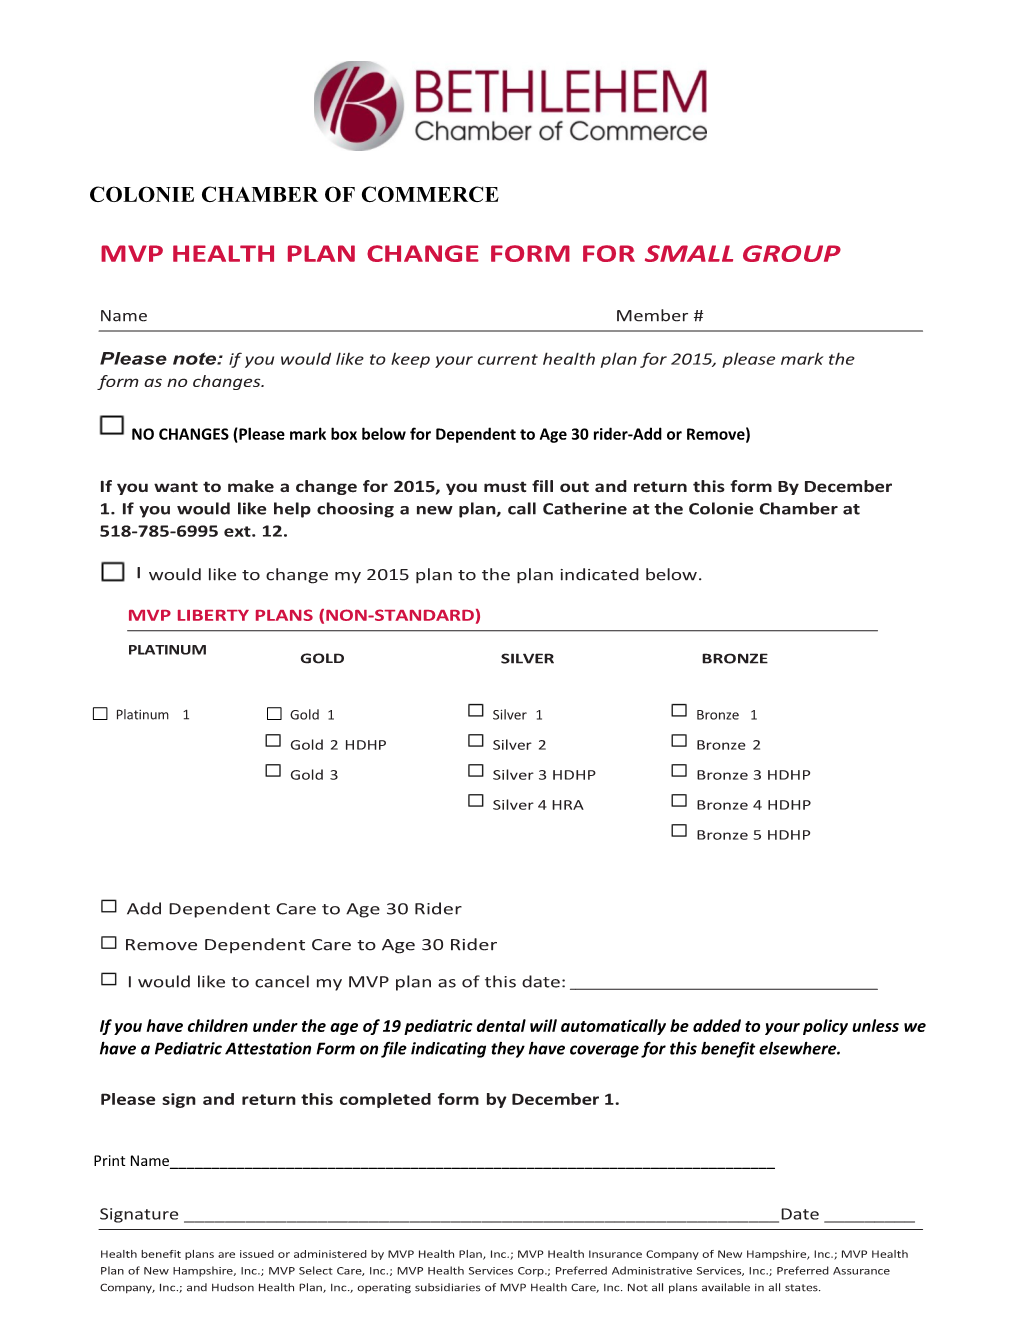 Health Plan Change Form for Small Group